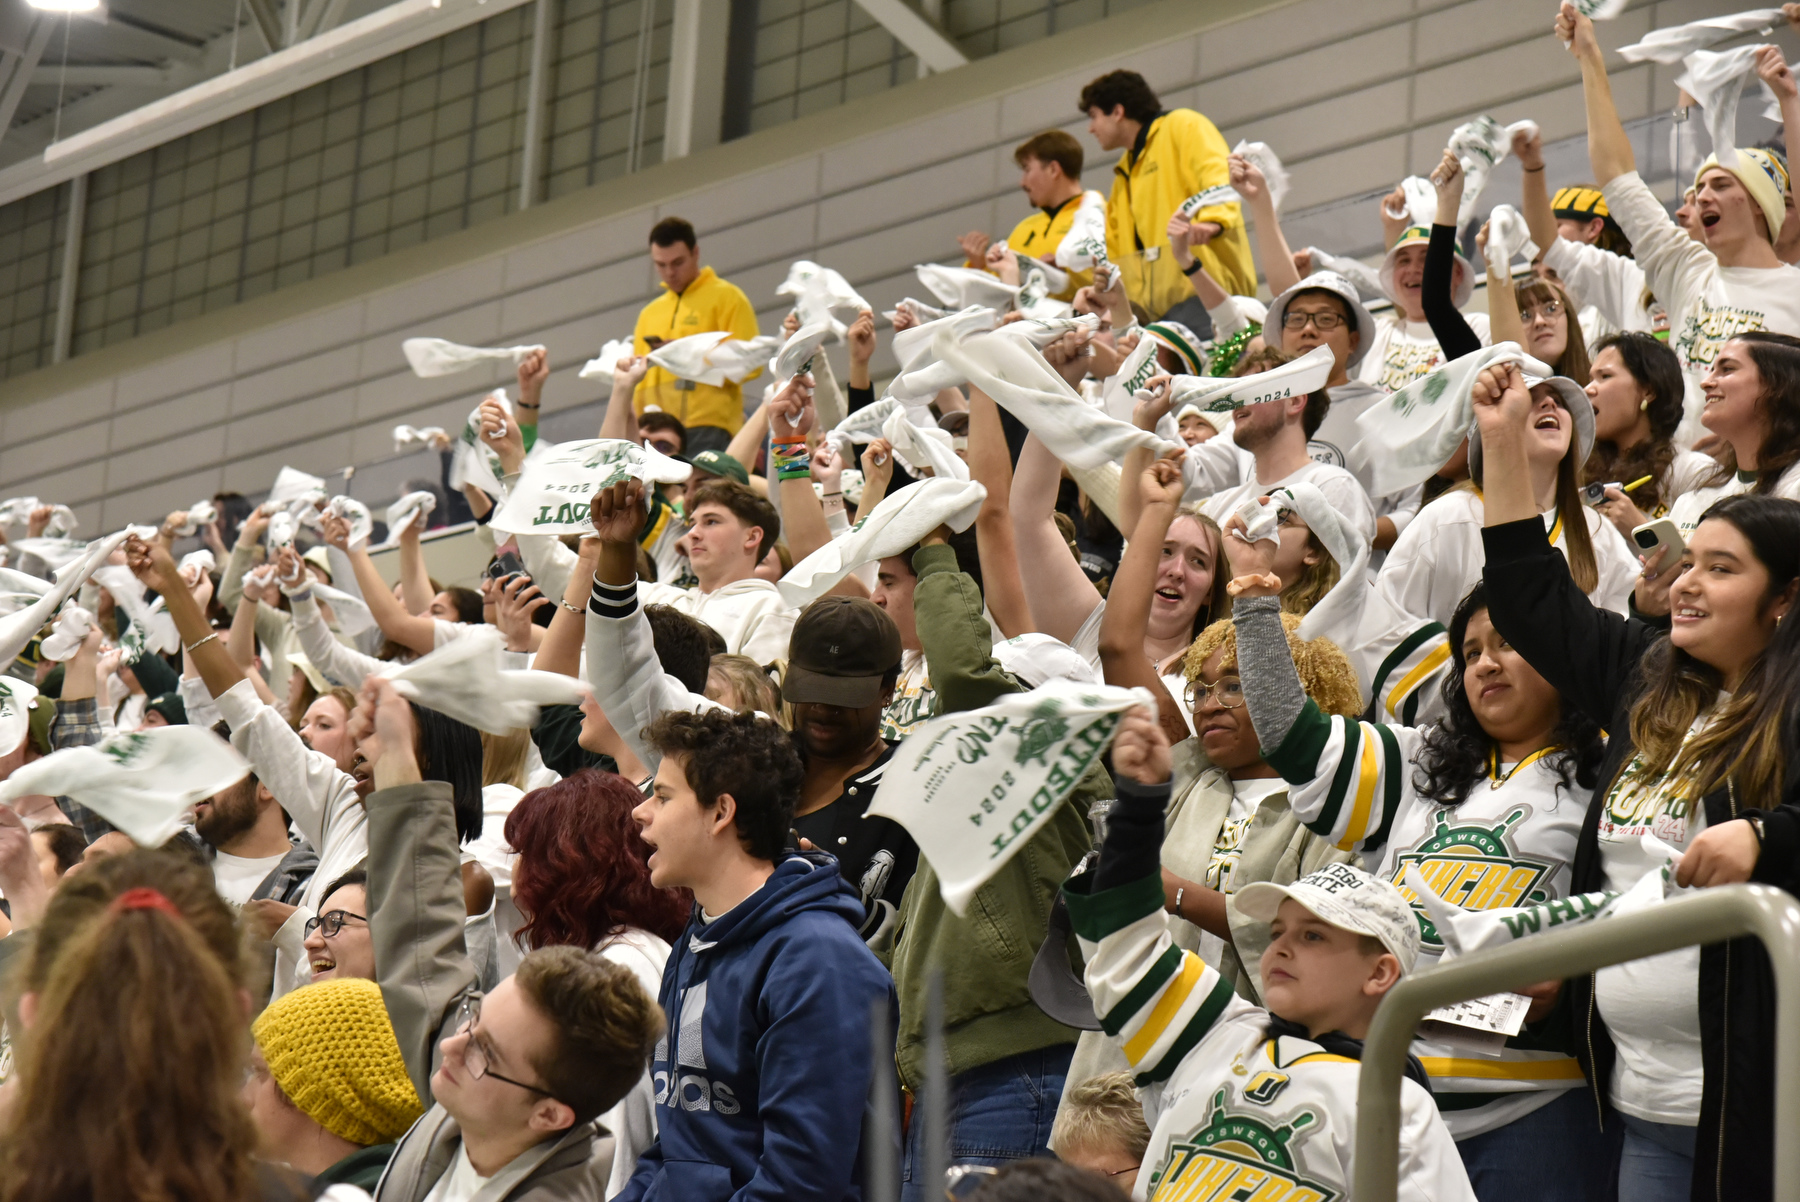 Fans cheer Oswego's second goal in the Whiteout men’s hockey rivalry game made by senior Tyler Flack en route to a 4-3 win against archrival Plattsburgh.